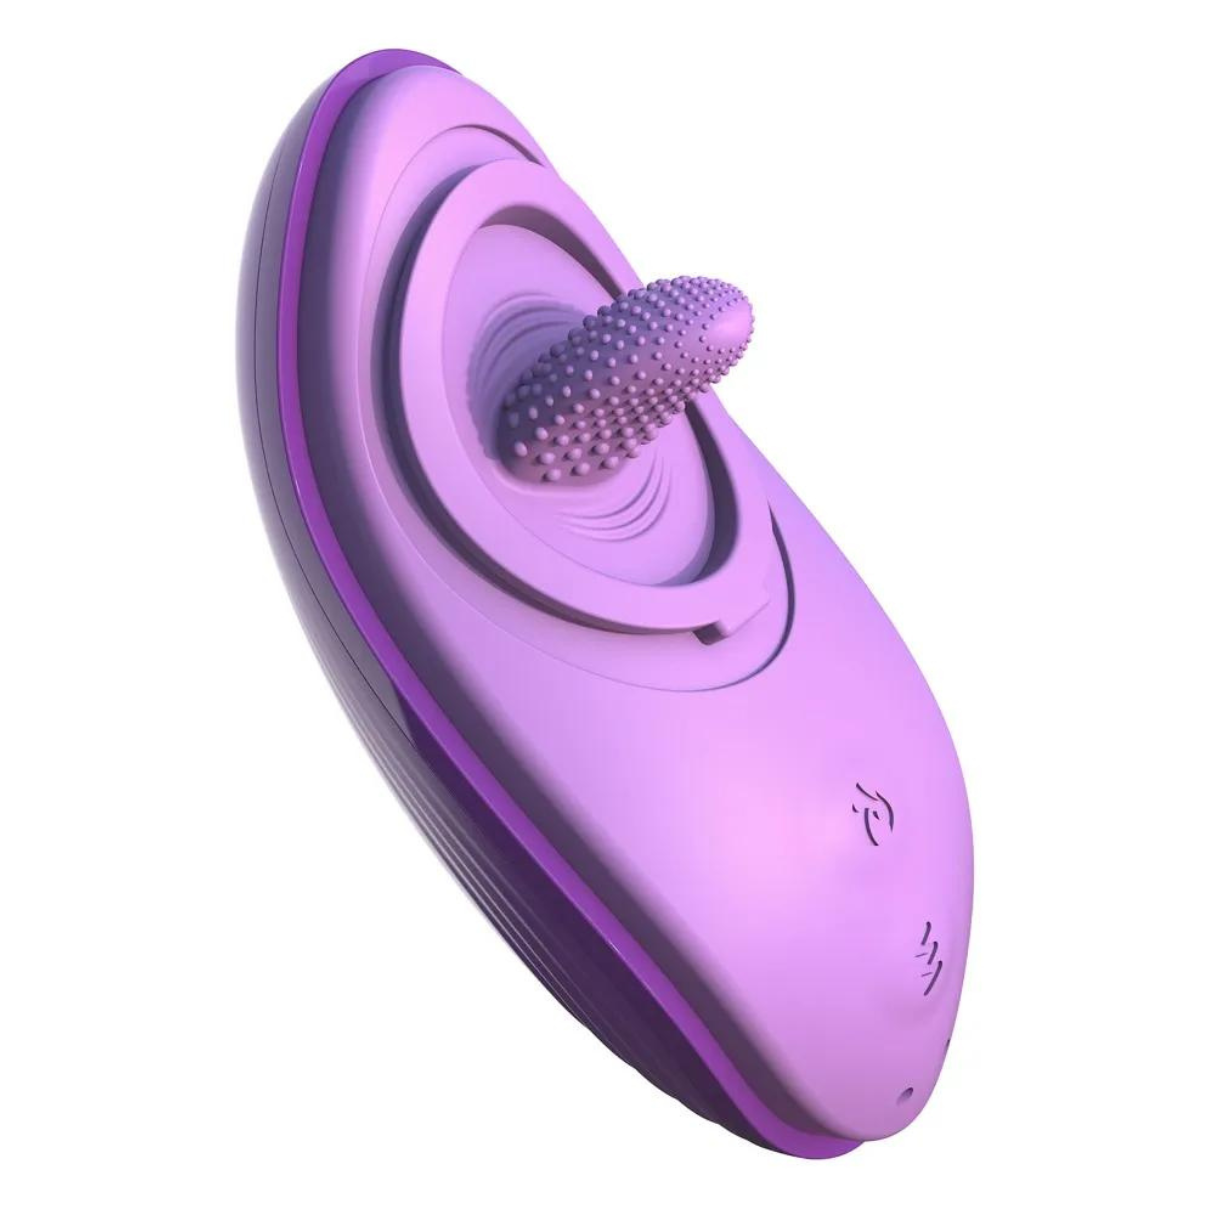 Tongue Silicone Fun Vibrator FANTASY Her FOR HER